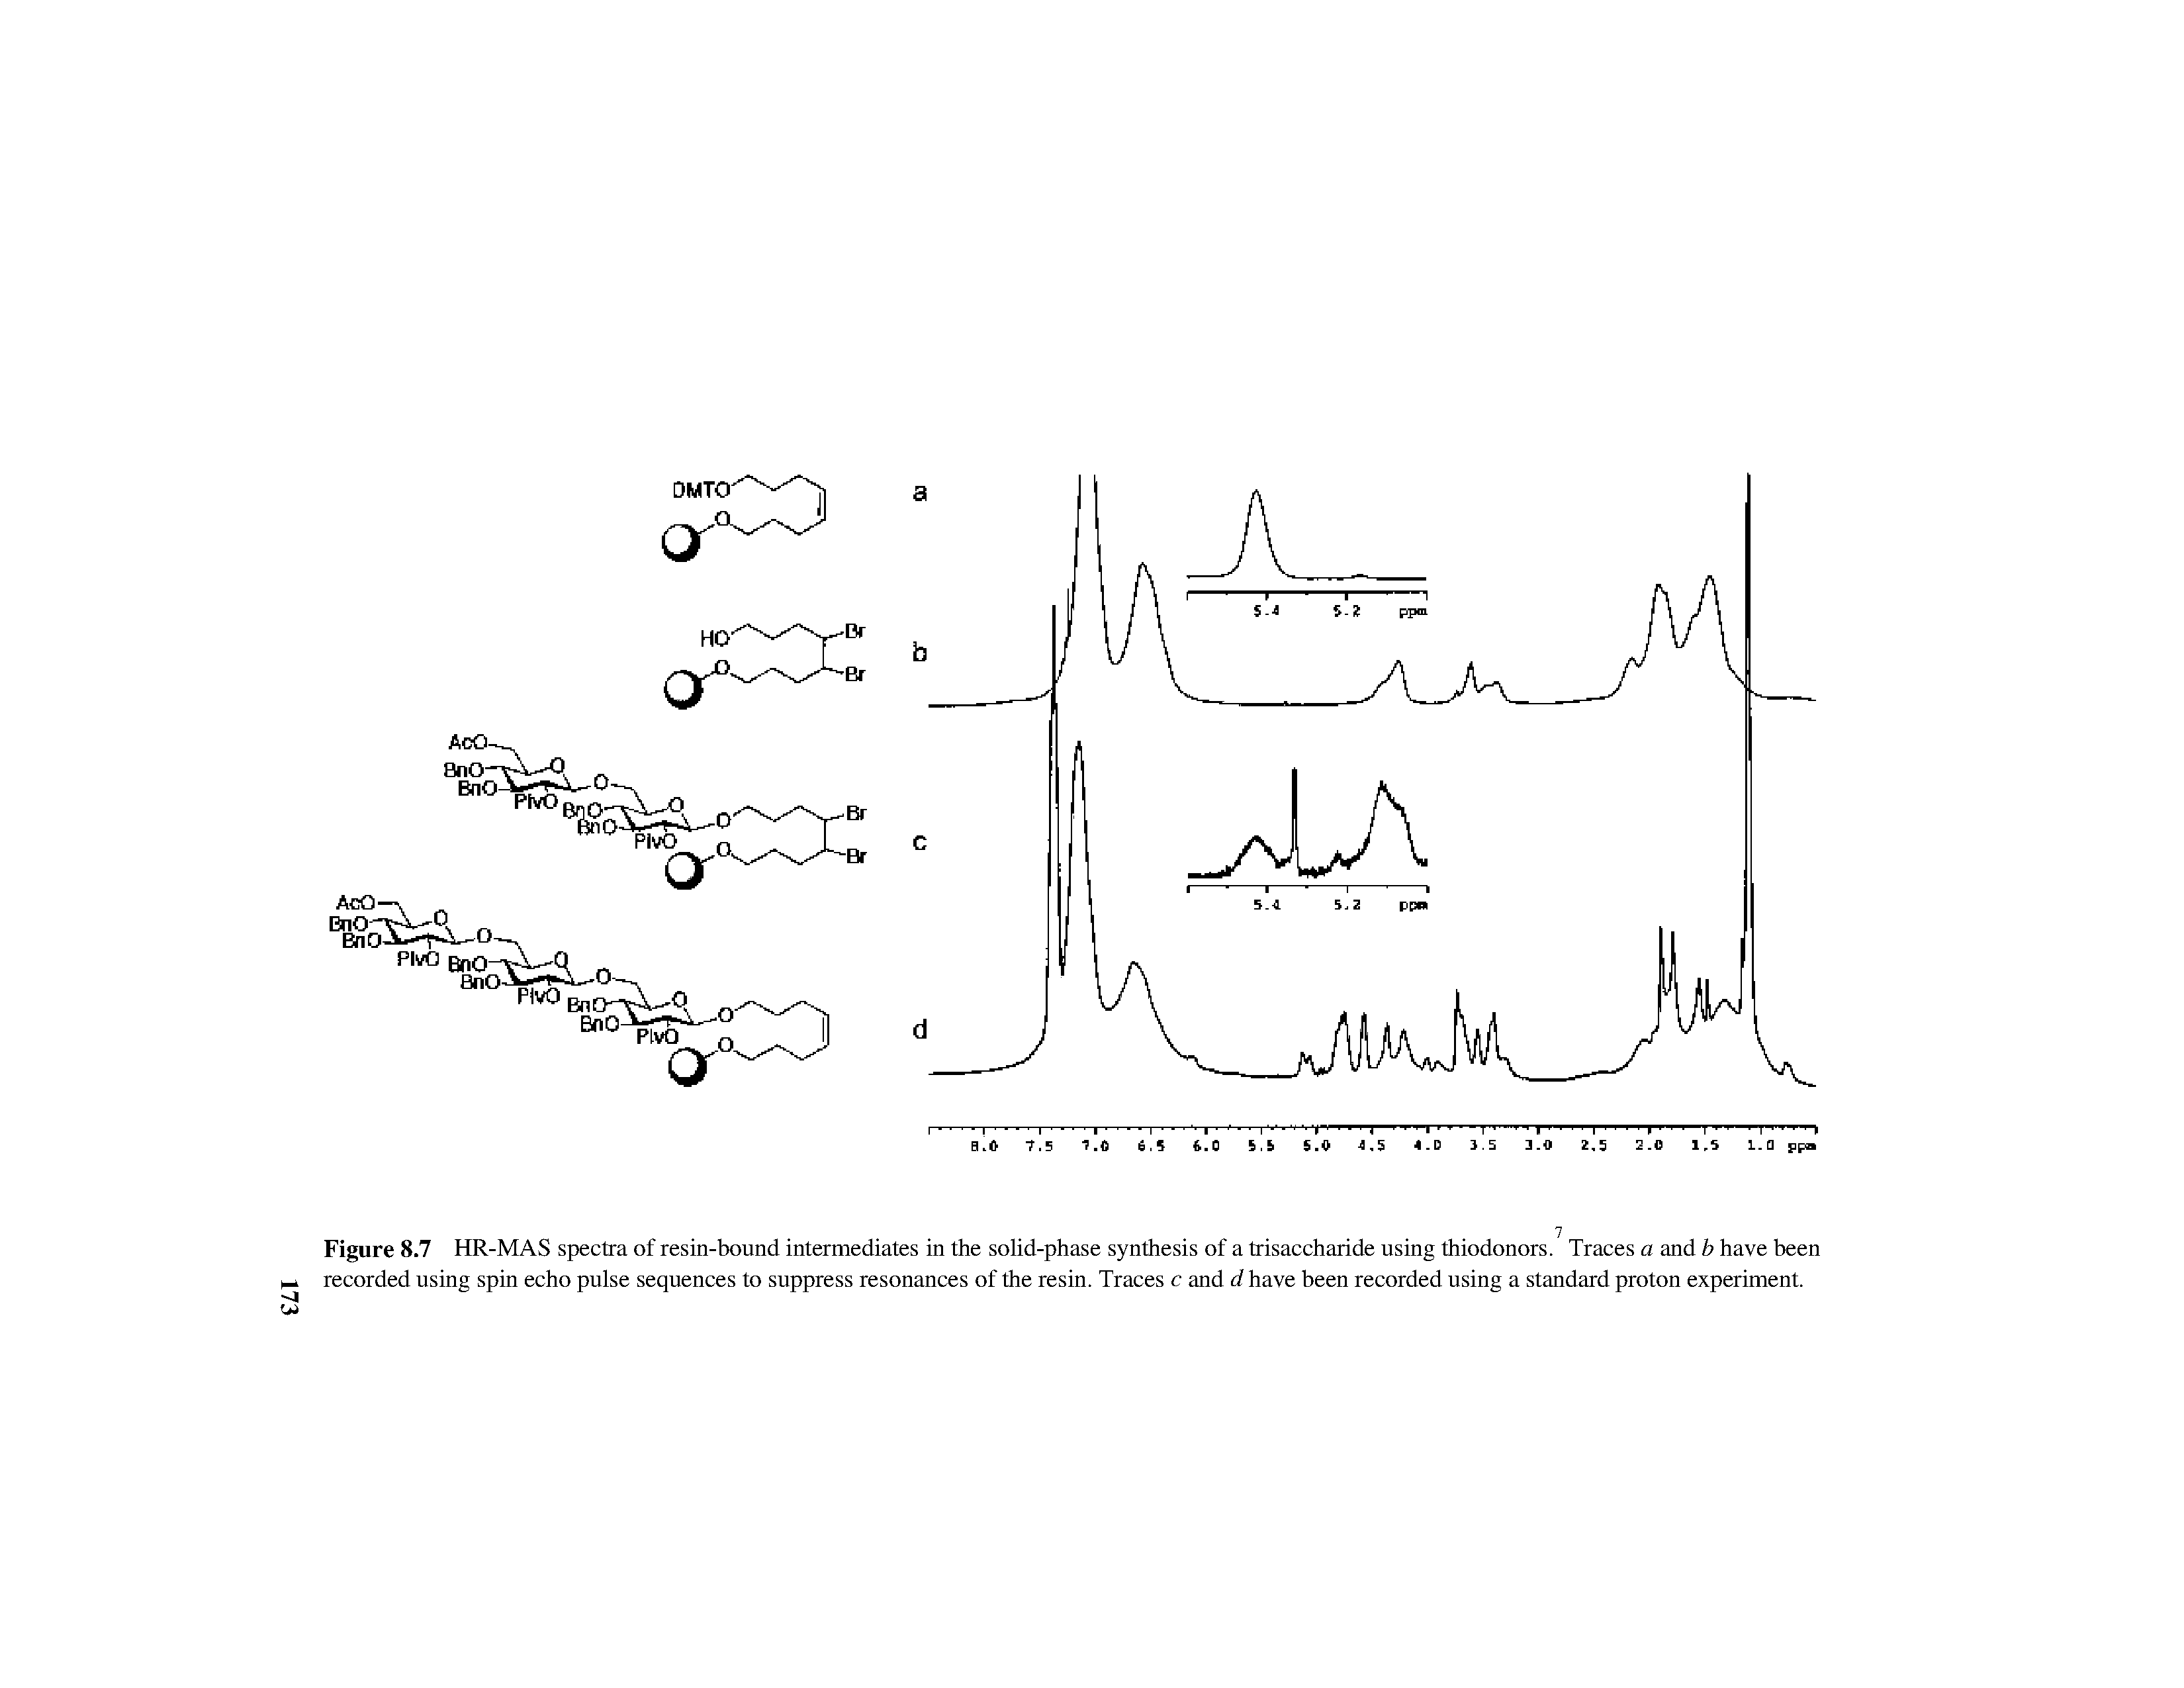 Figure 8.7 HR-MAS spectra of resin-bound intermediates in the solid-phase synthesis of a trisaccharide using thiodonors. Traces a and b have been recorded using spin echo pulse sequences to suppress resonances of the resin. Traces c and d have been recorded using a standard proton experiment.